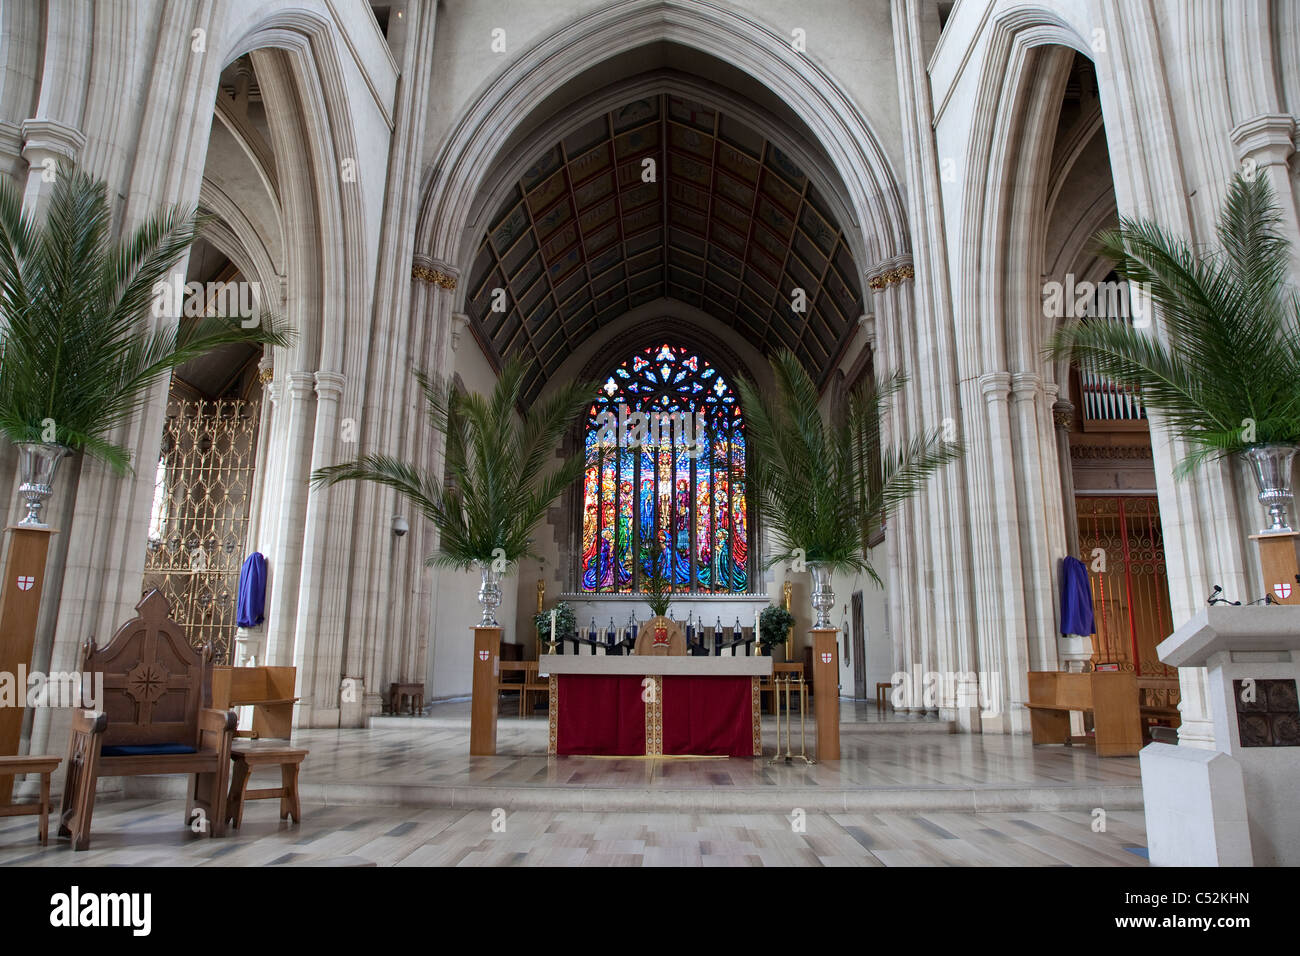 Altar of St George's Roman Catholic Cathedral Church in Camberwell, London, England, UK Stock Photo